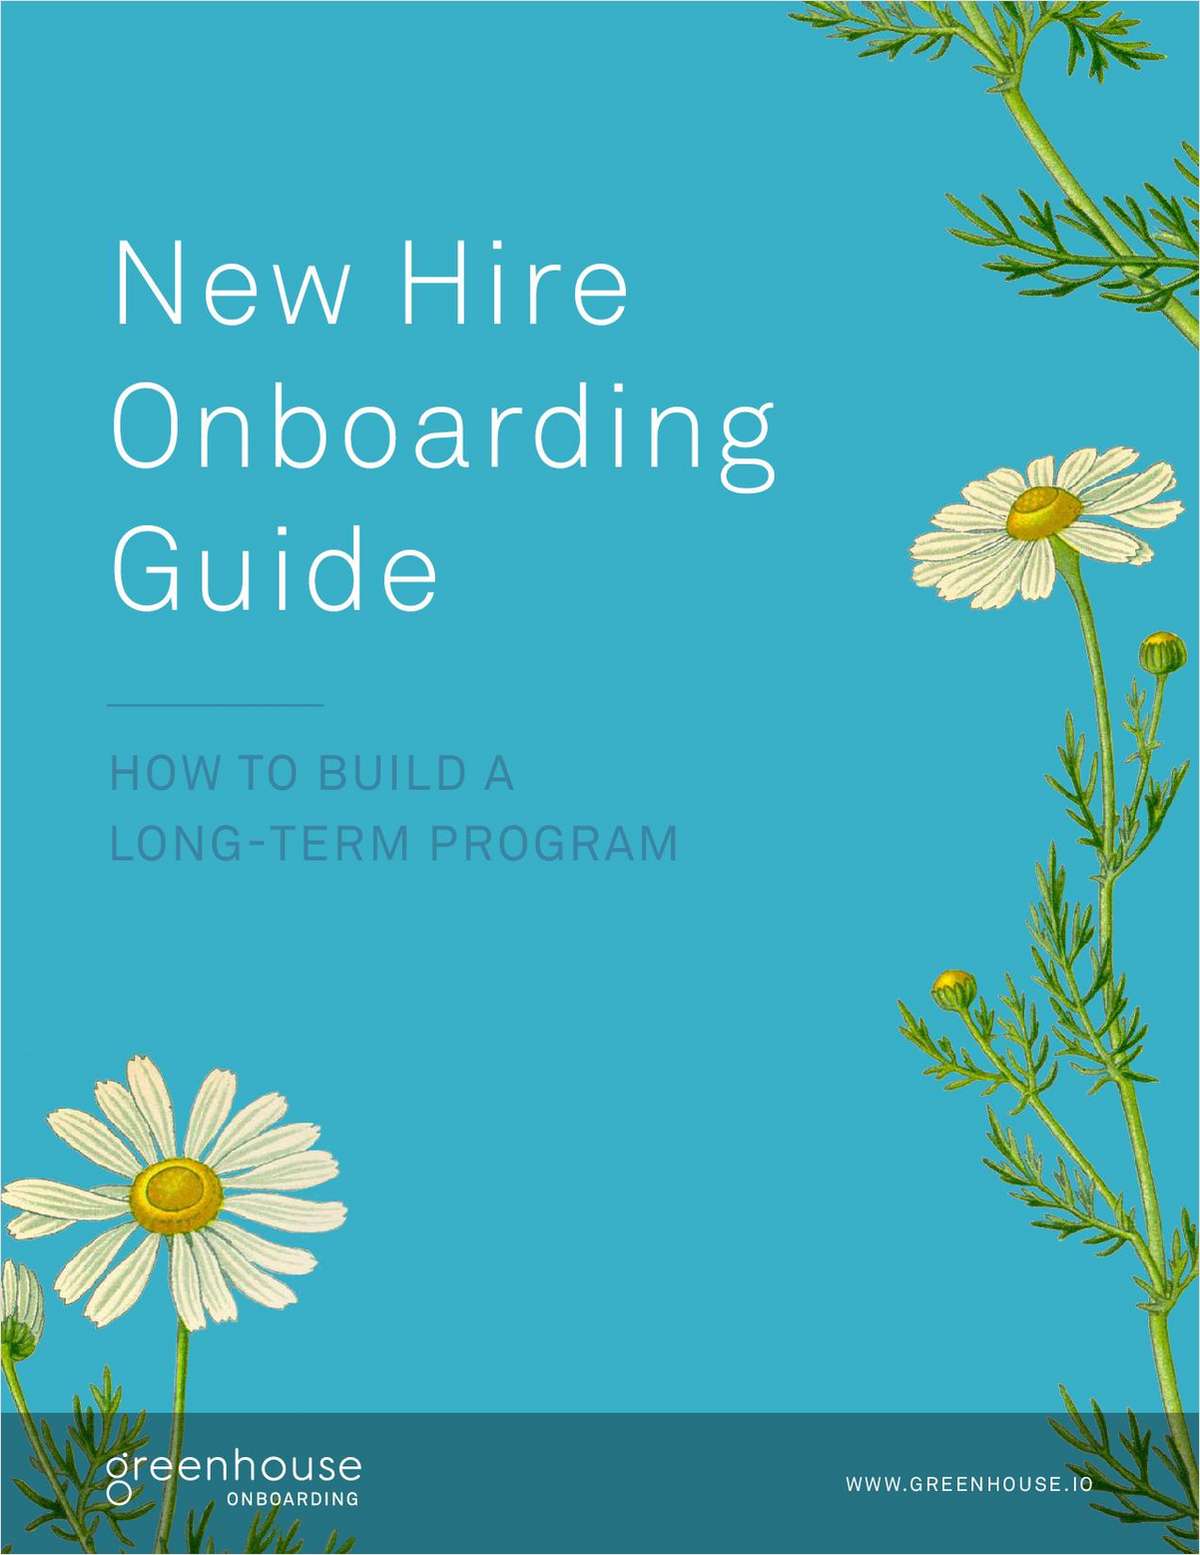 The New Hire Onboarding Guide: How to Build a Long-Term Program